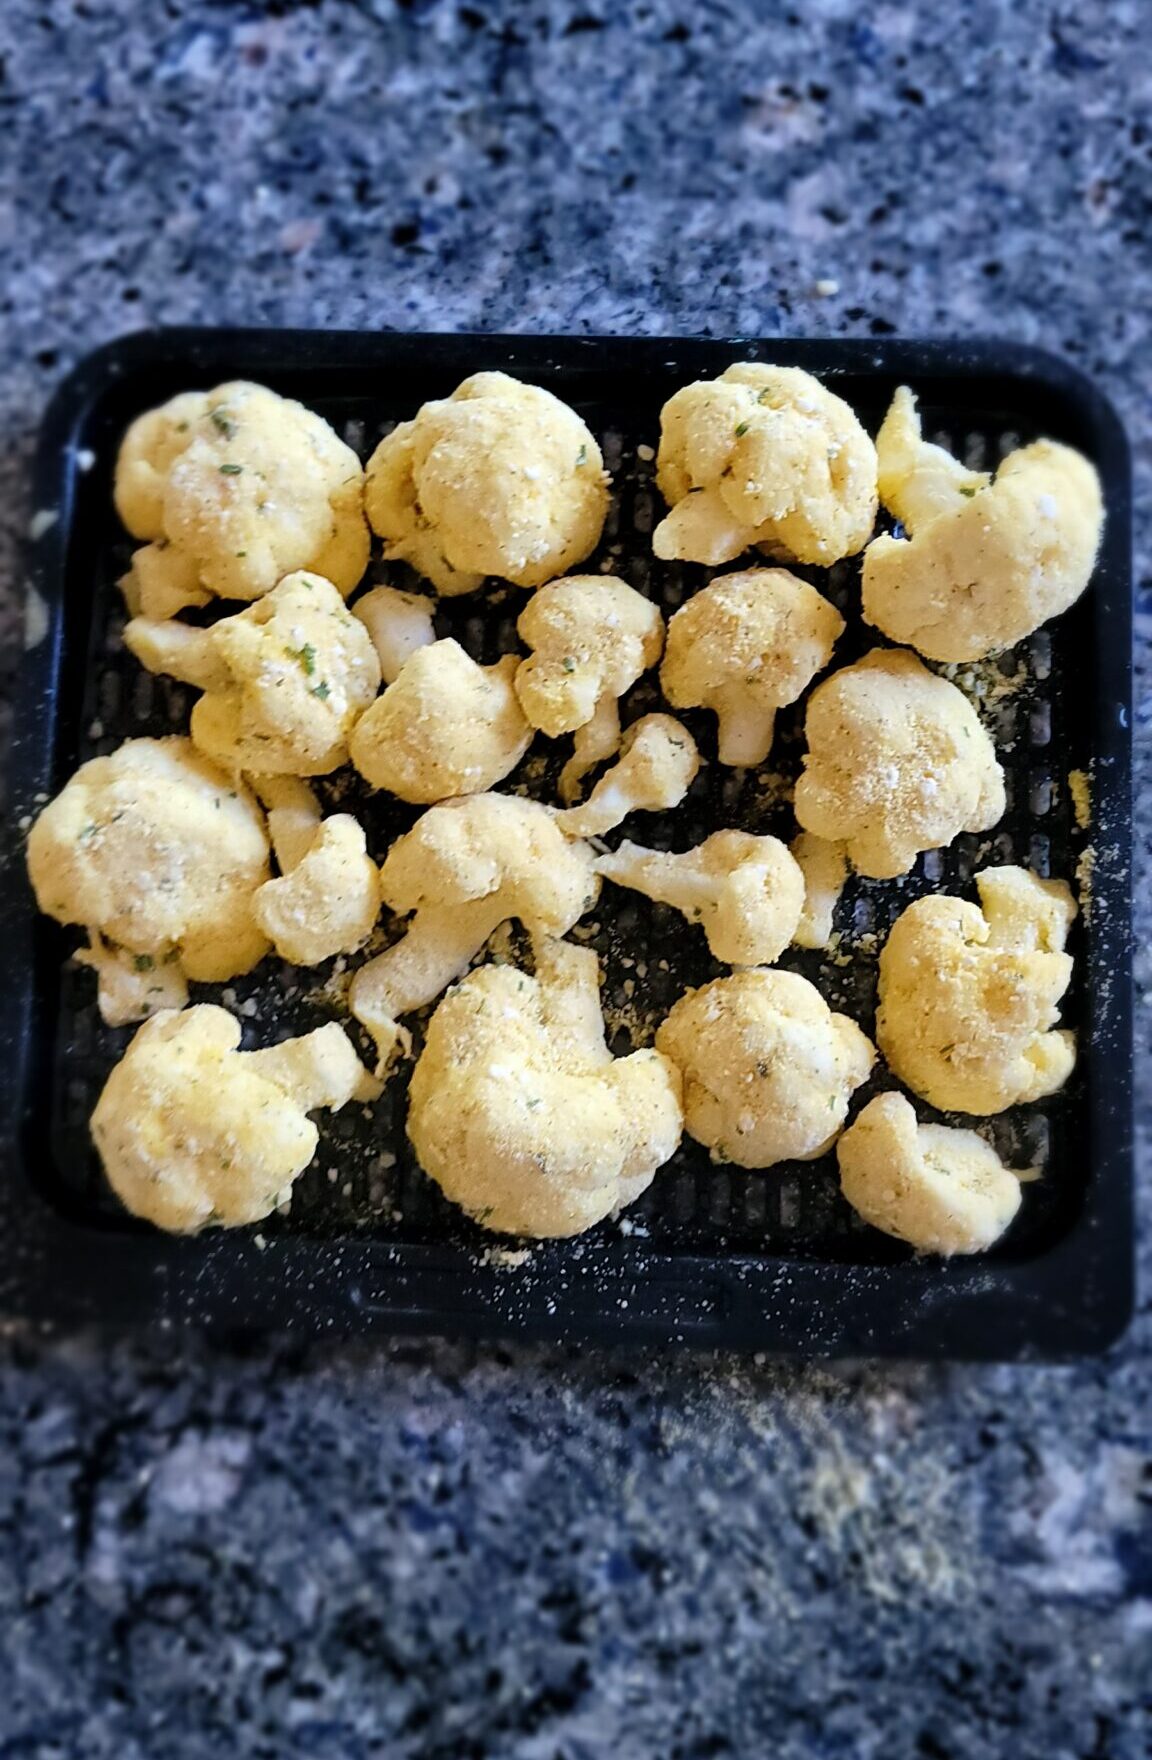 Prepping for the Air Fried Crazy Crunchy Breaded Cauliflower